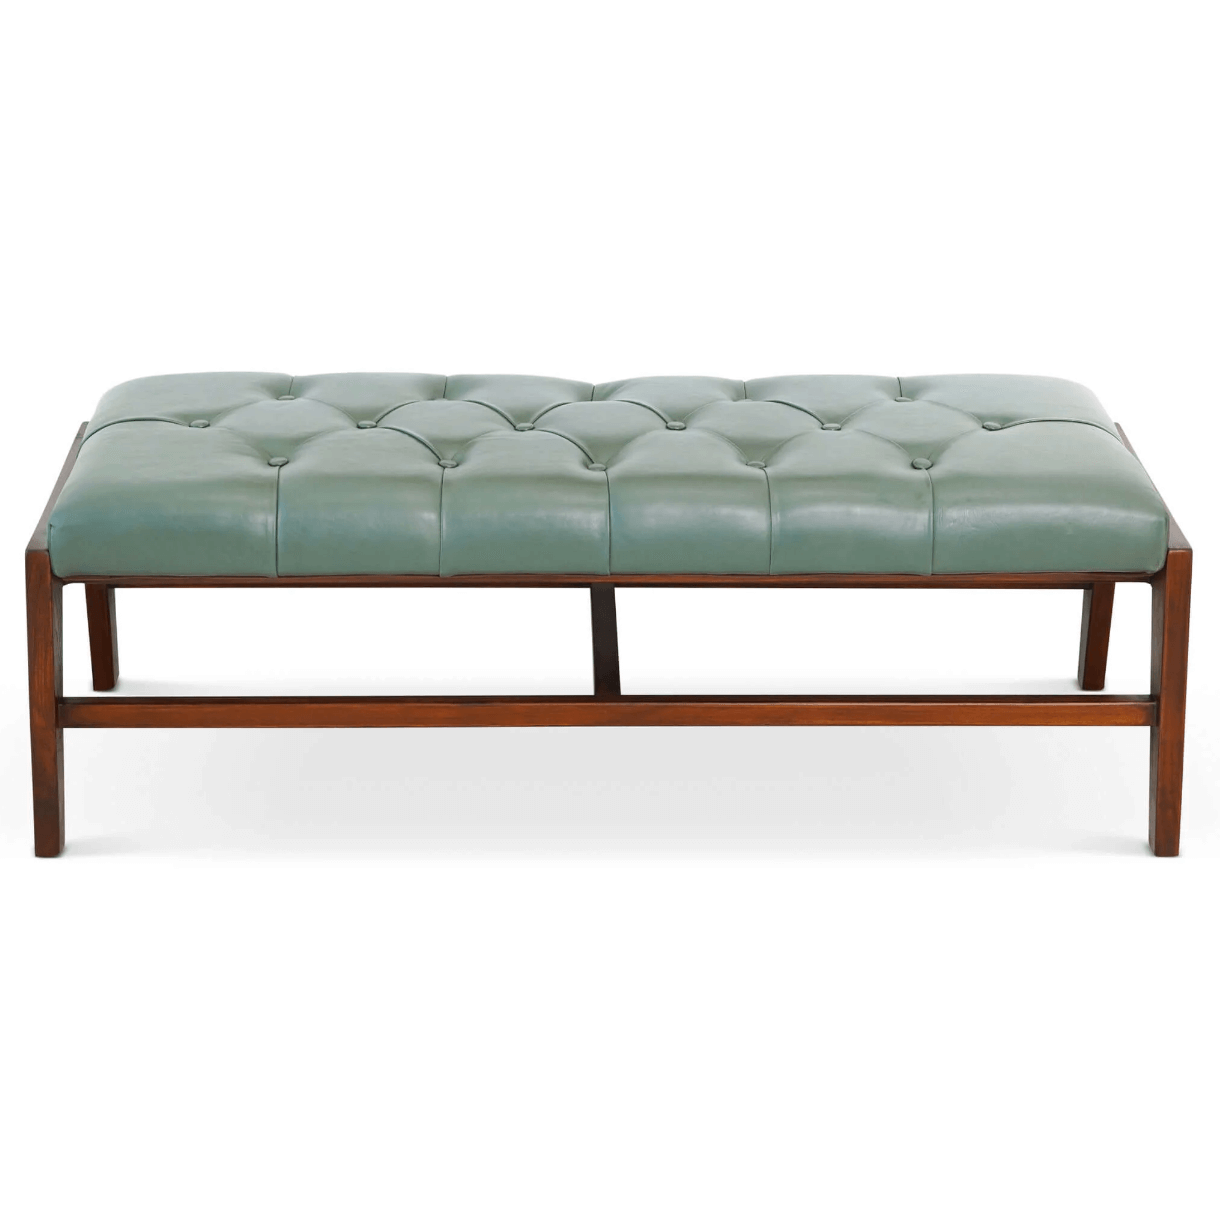 Hera Solid Wood Bench Button Tufted Green Leather Upholstery 49" - Revel Sofa 